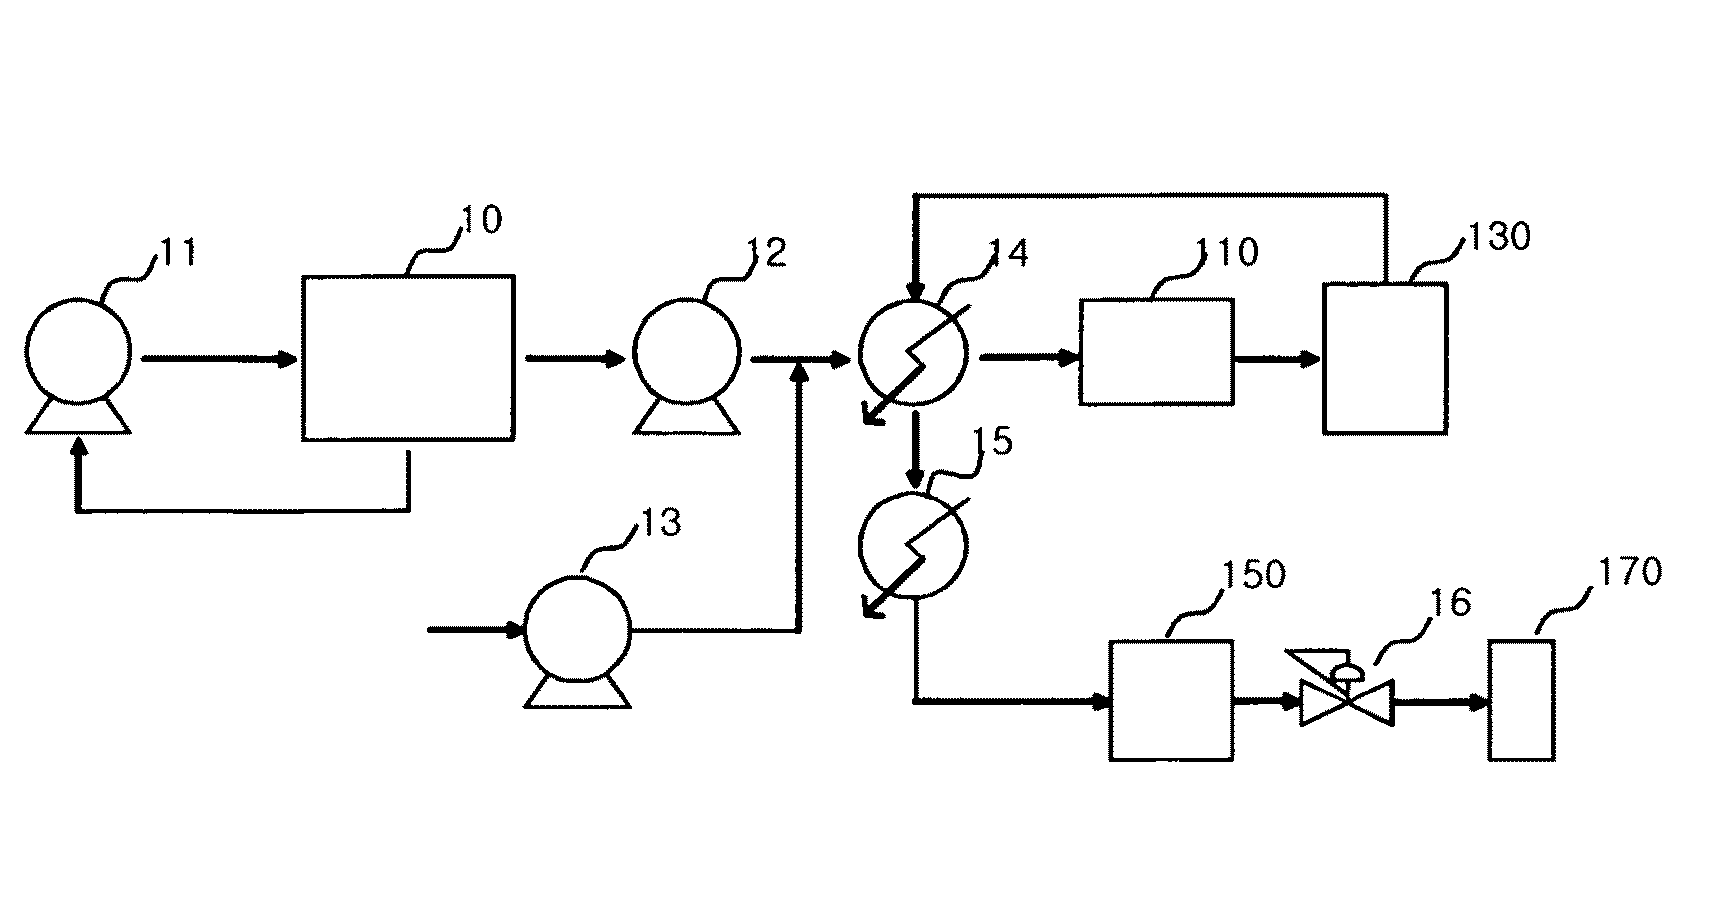 Continuous methods and apparatus of functionalizing carbon nanotube